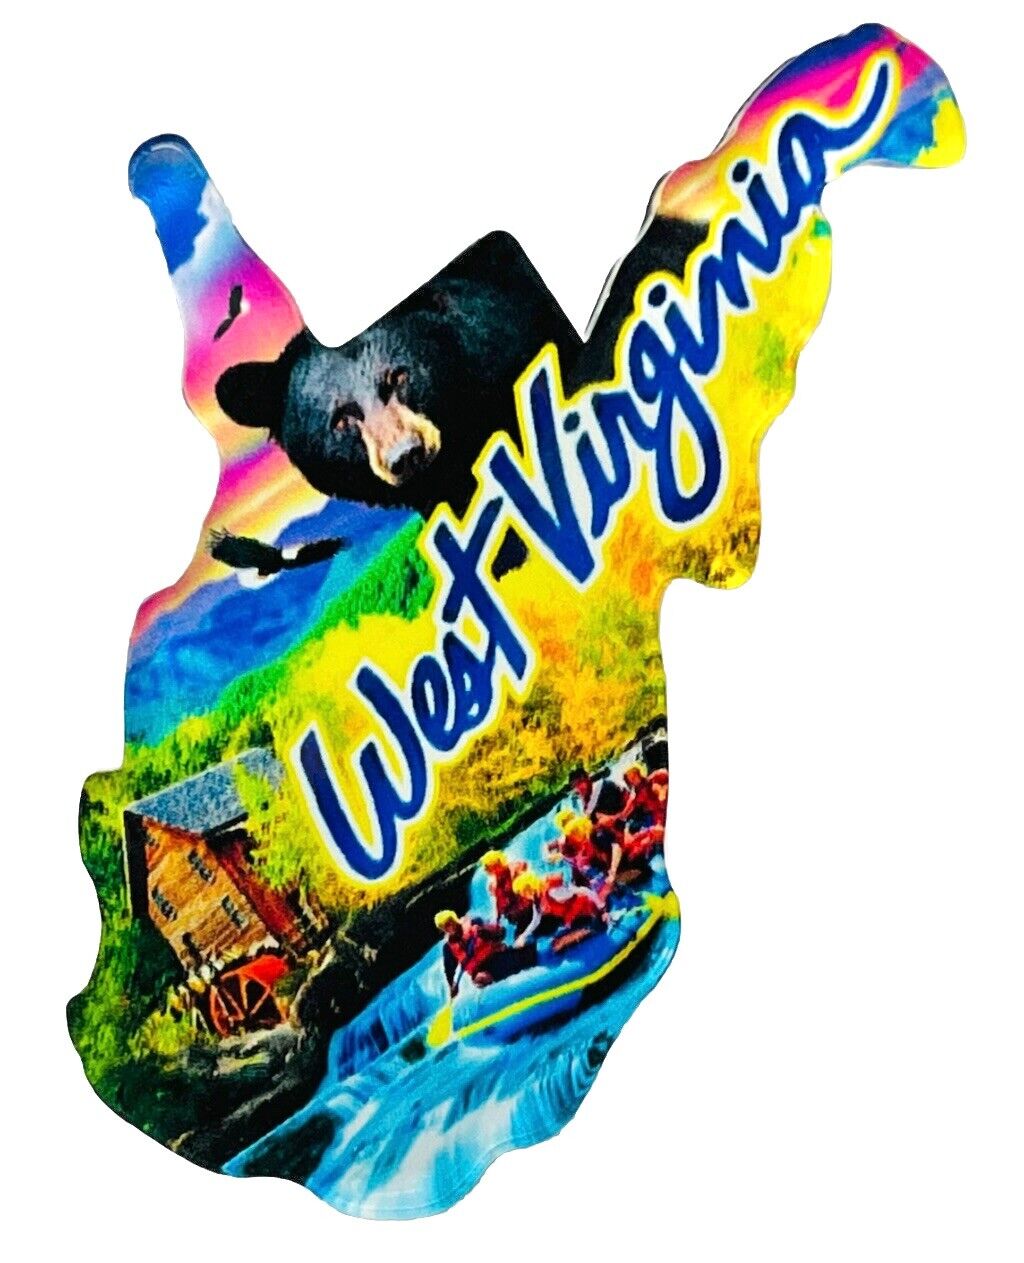 West Virginia State Souvenir Acrylic Magnet Collage/Bear/Rafting 4”x 3.25” NWT